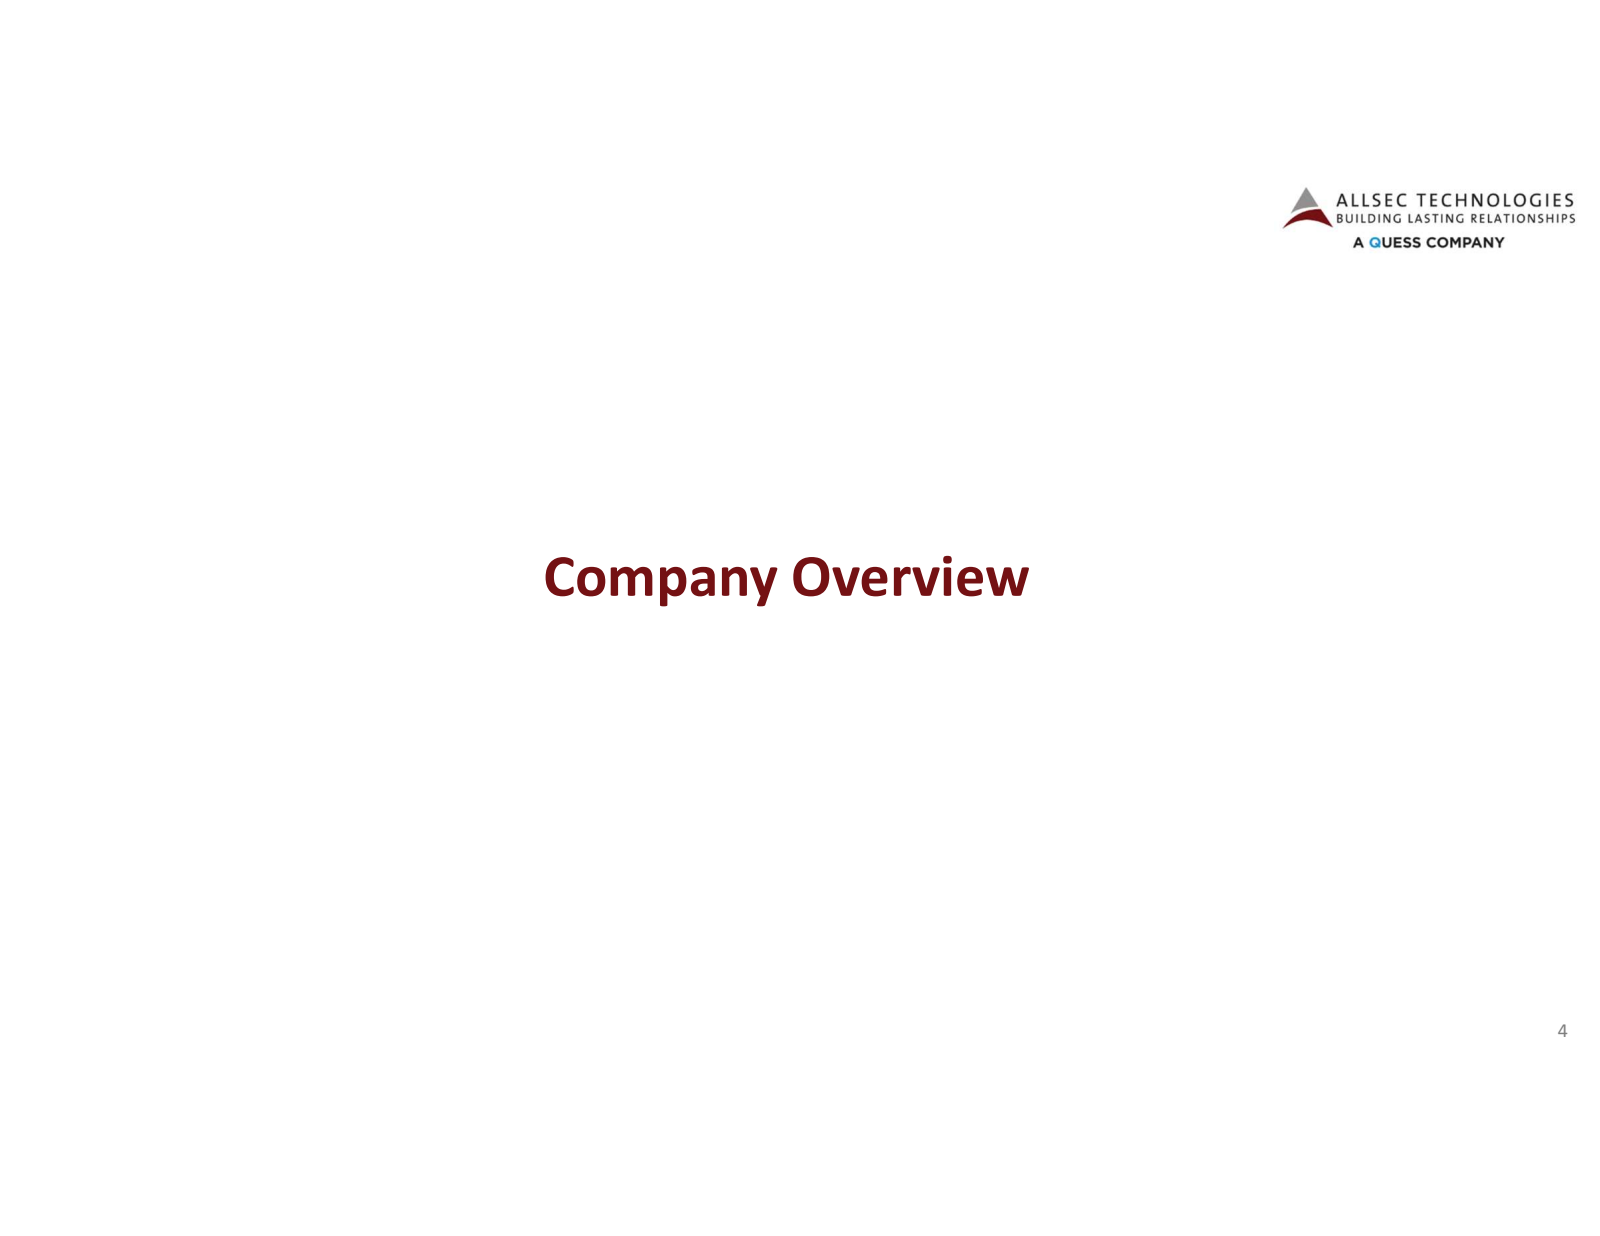 Company Overview 

A